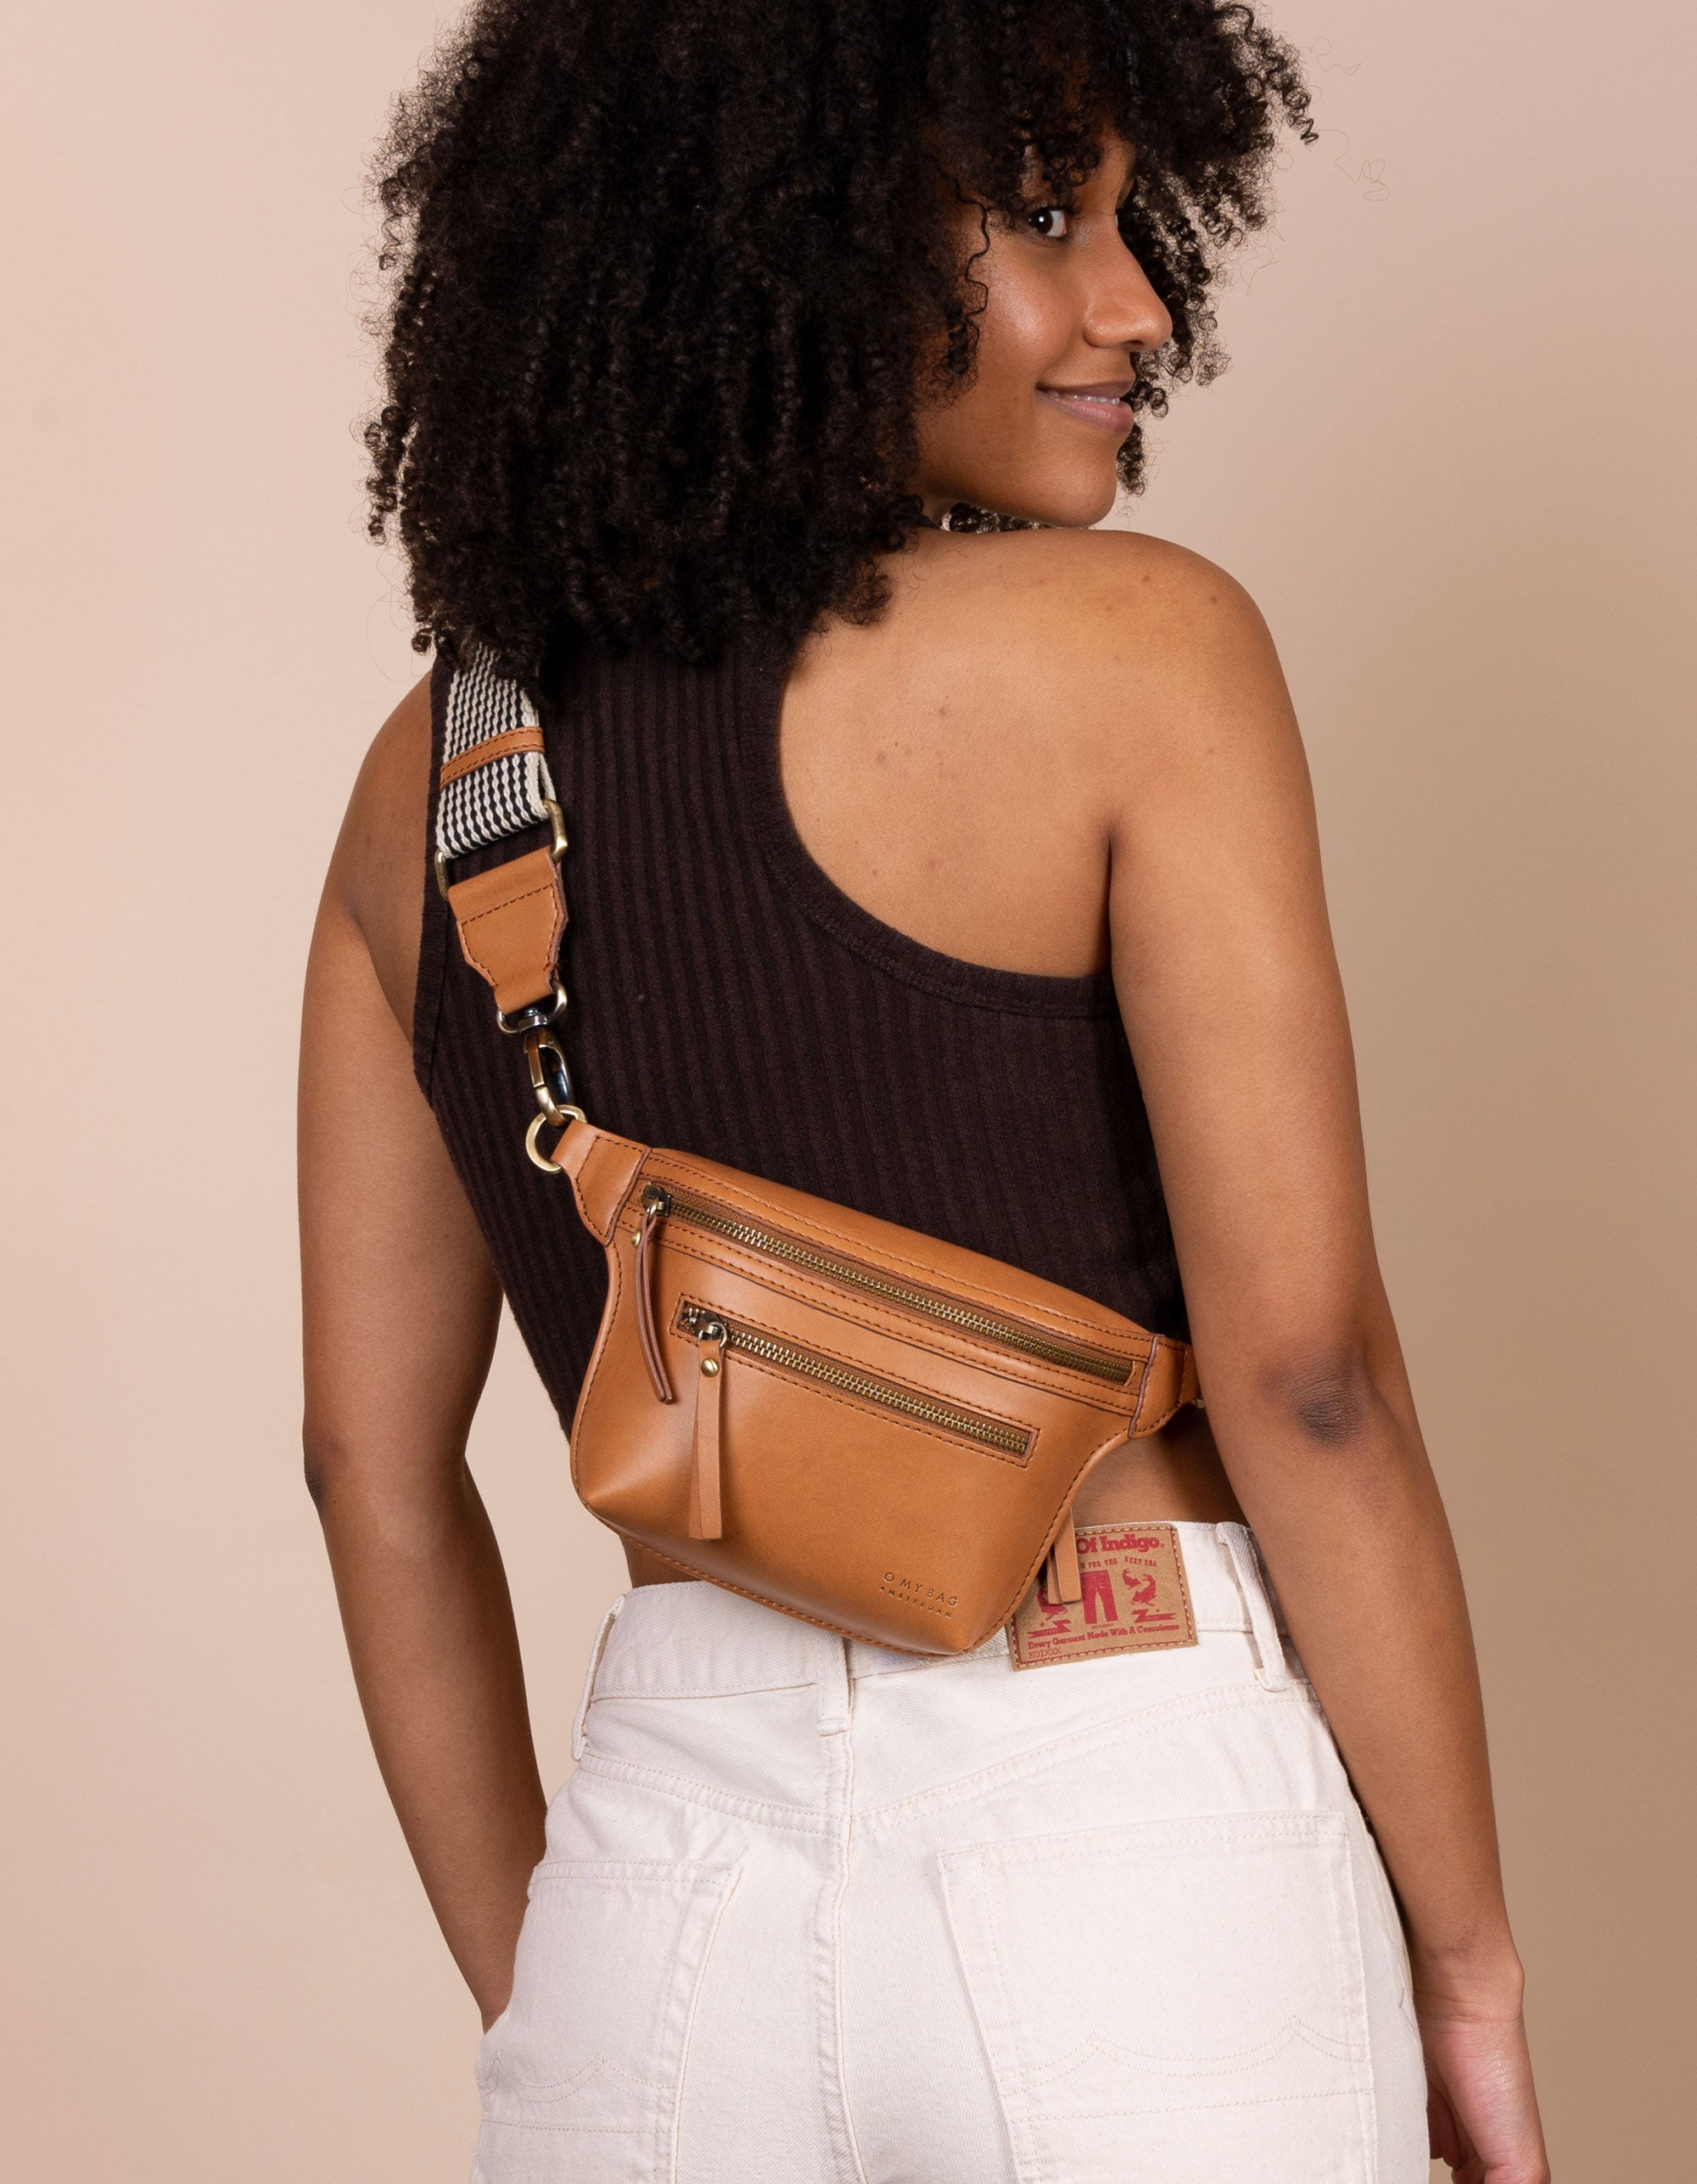 Beck's Bum Bag | Apple Leather